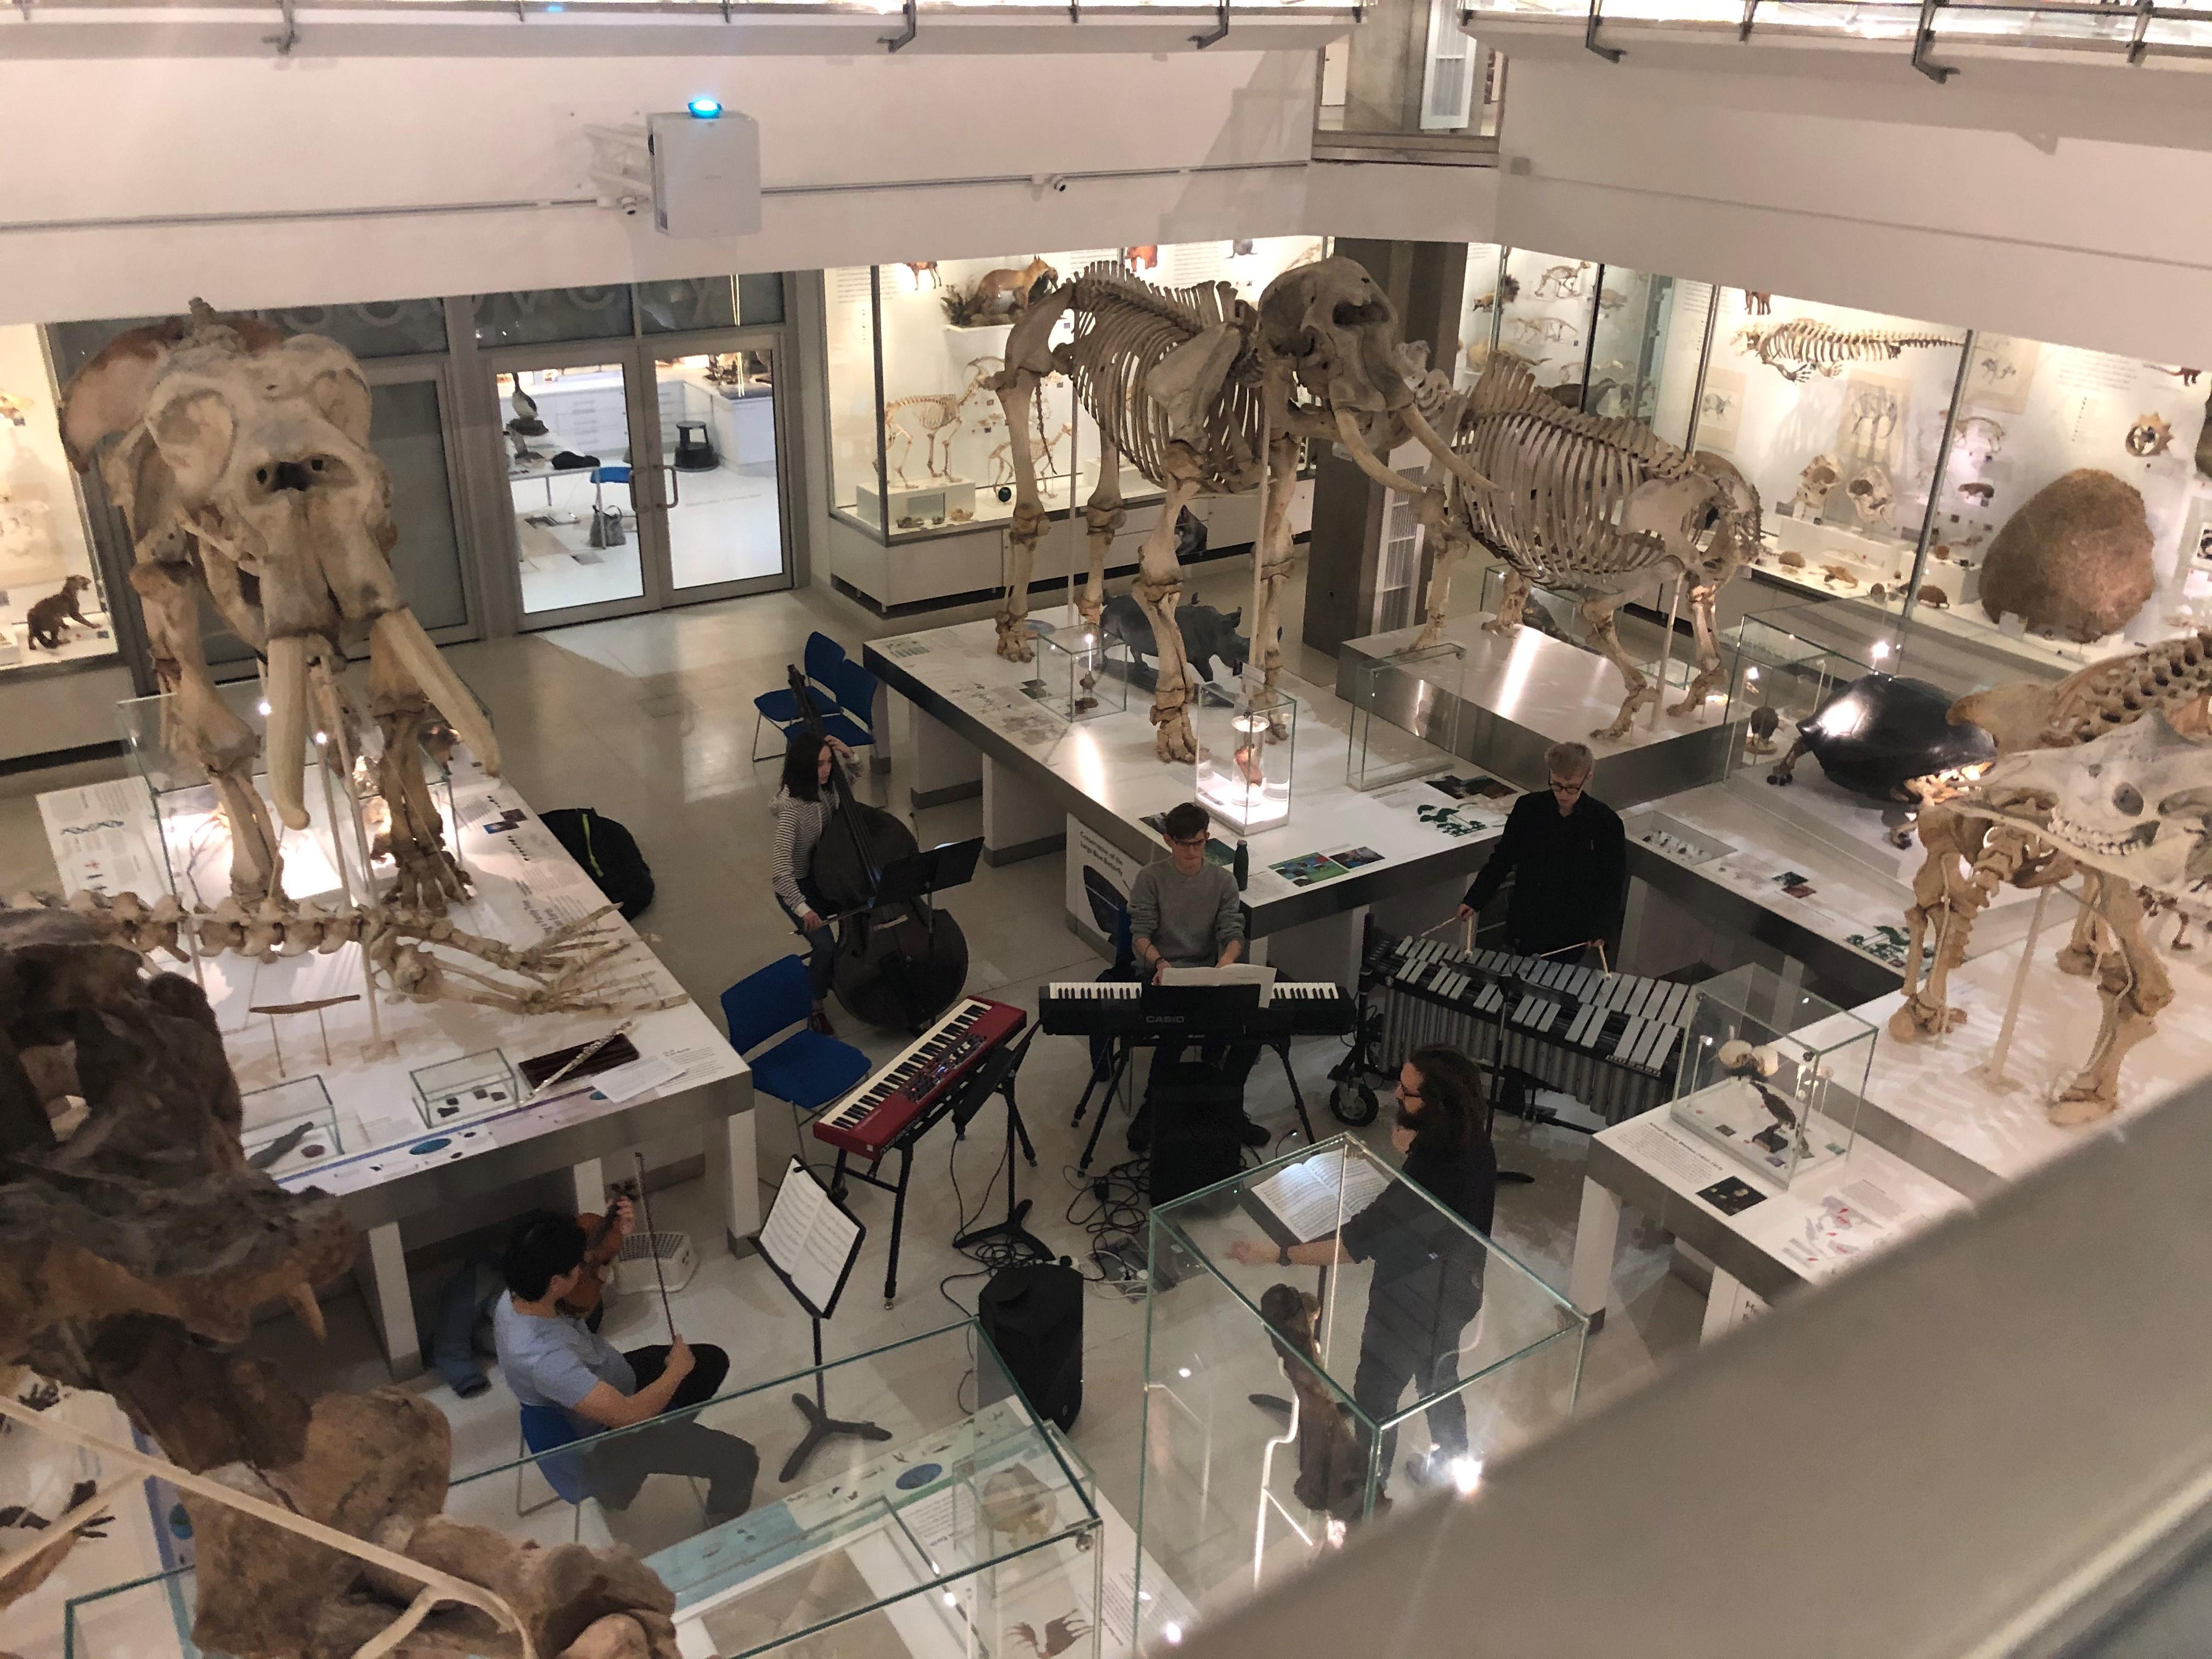 Cambridge University New Music Group performing in the Zoology Museum, January 2020